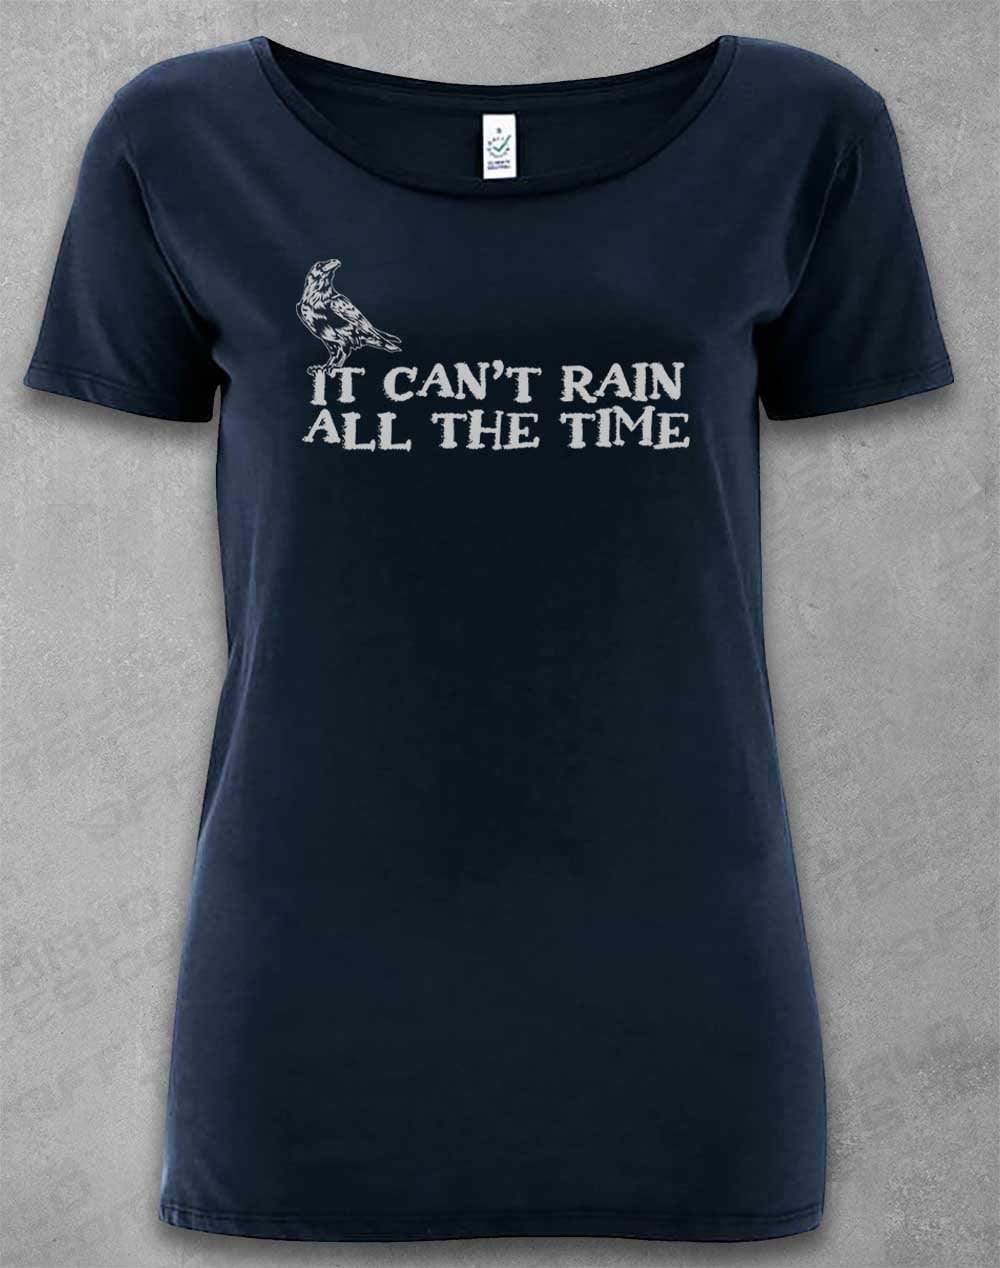 DELUXE It Can't Rain All the Time Organic Scoop Neck T-Shirt 8-10 / Navy  - Off World Tees